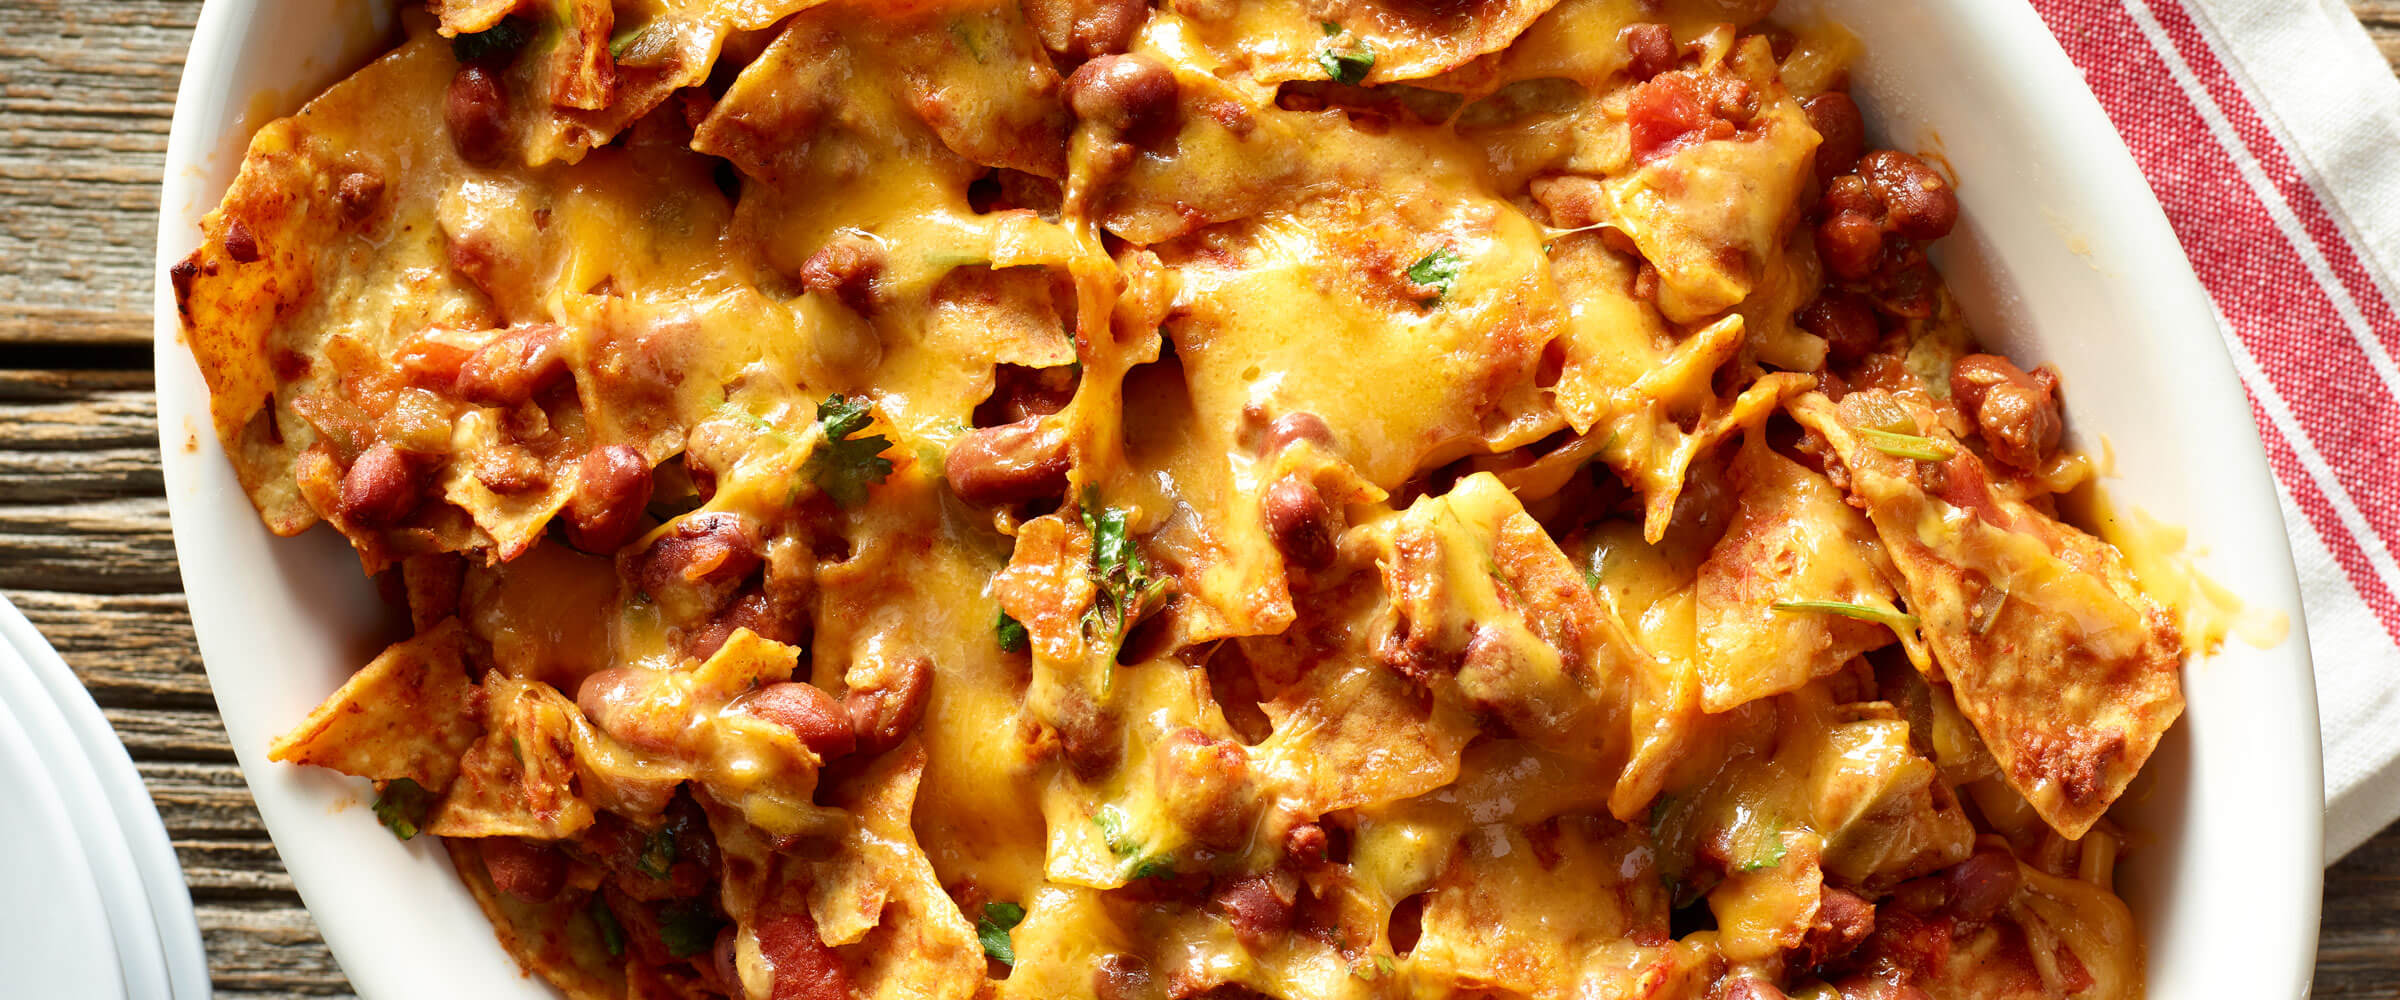 Chili Chips Casserole in white dish topped with cheese